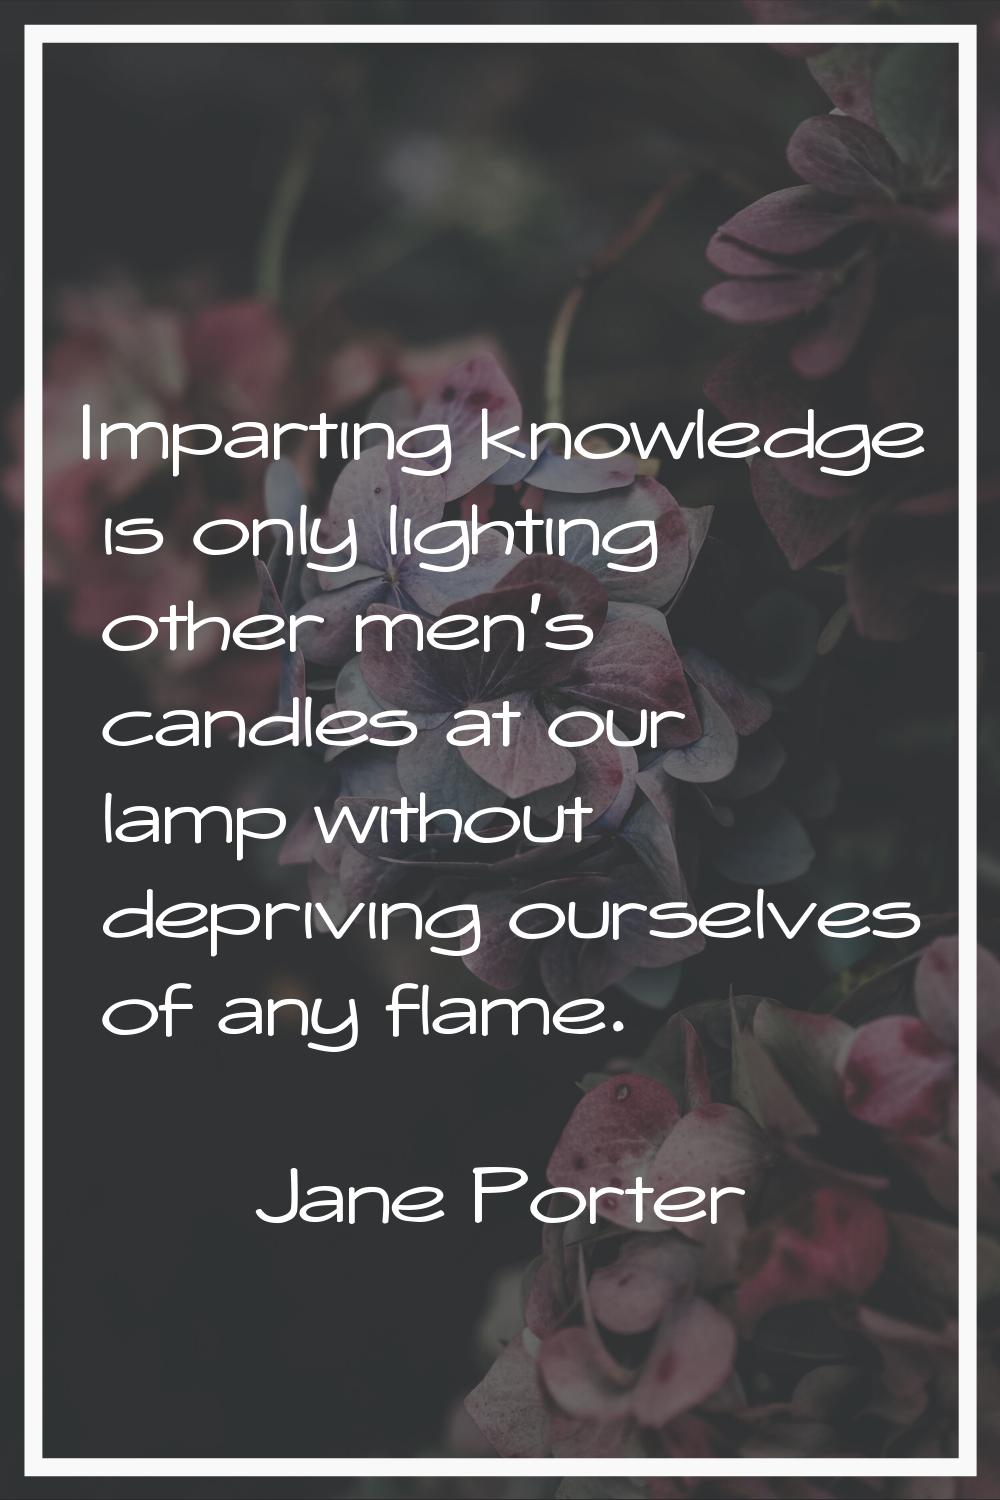 Imparting knowledge is only lighting other men's candles at our lamp without depriving ourselves of